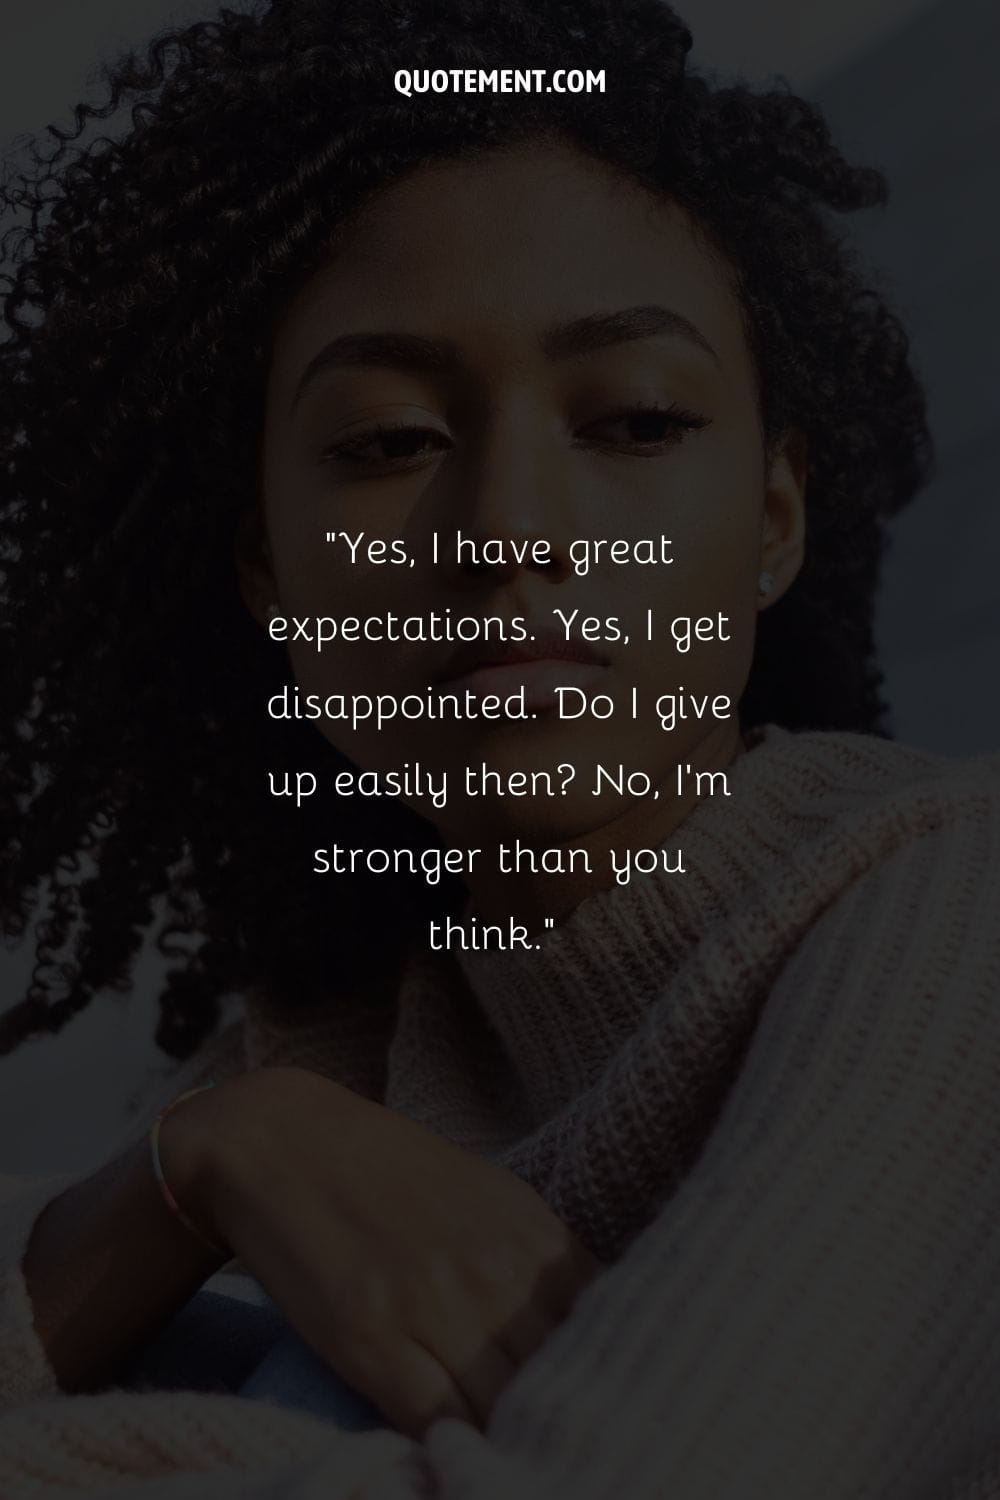 Yes, I have great expectations. Yes, I get disappointed. Do I give up easily then No, I’m stronger than you think